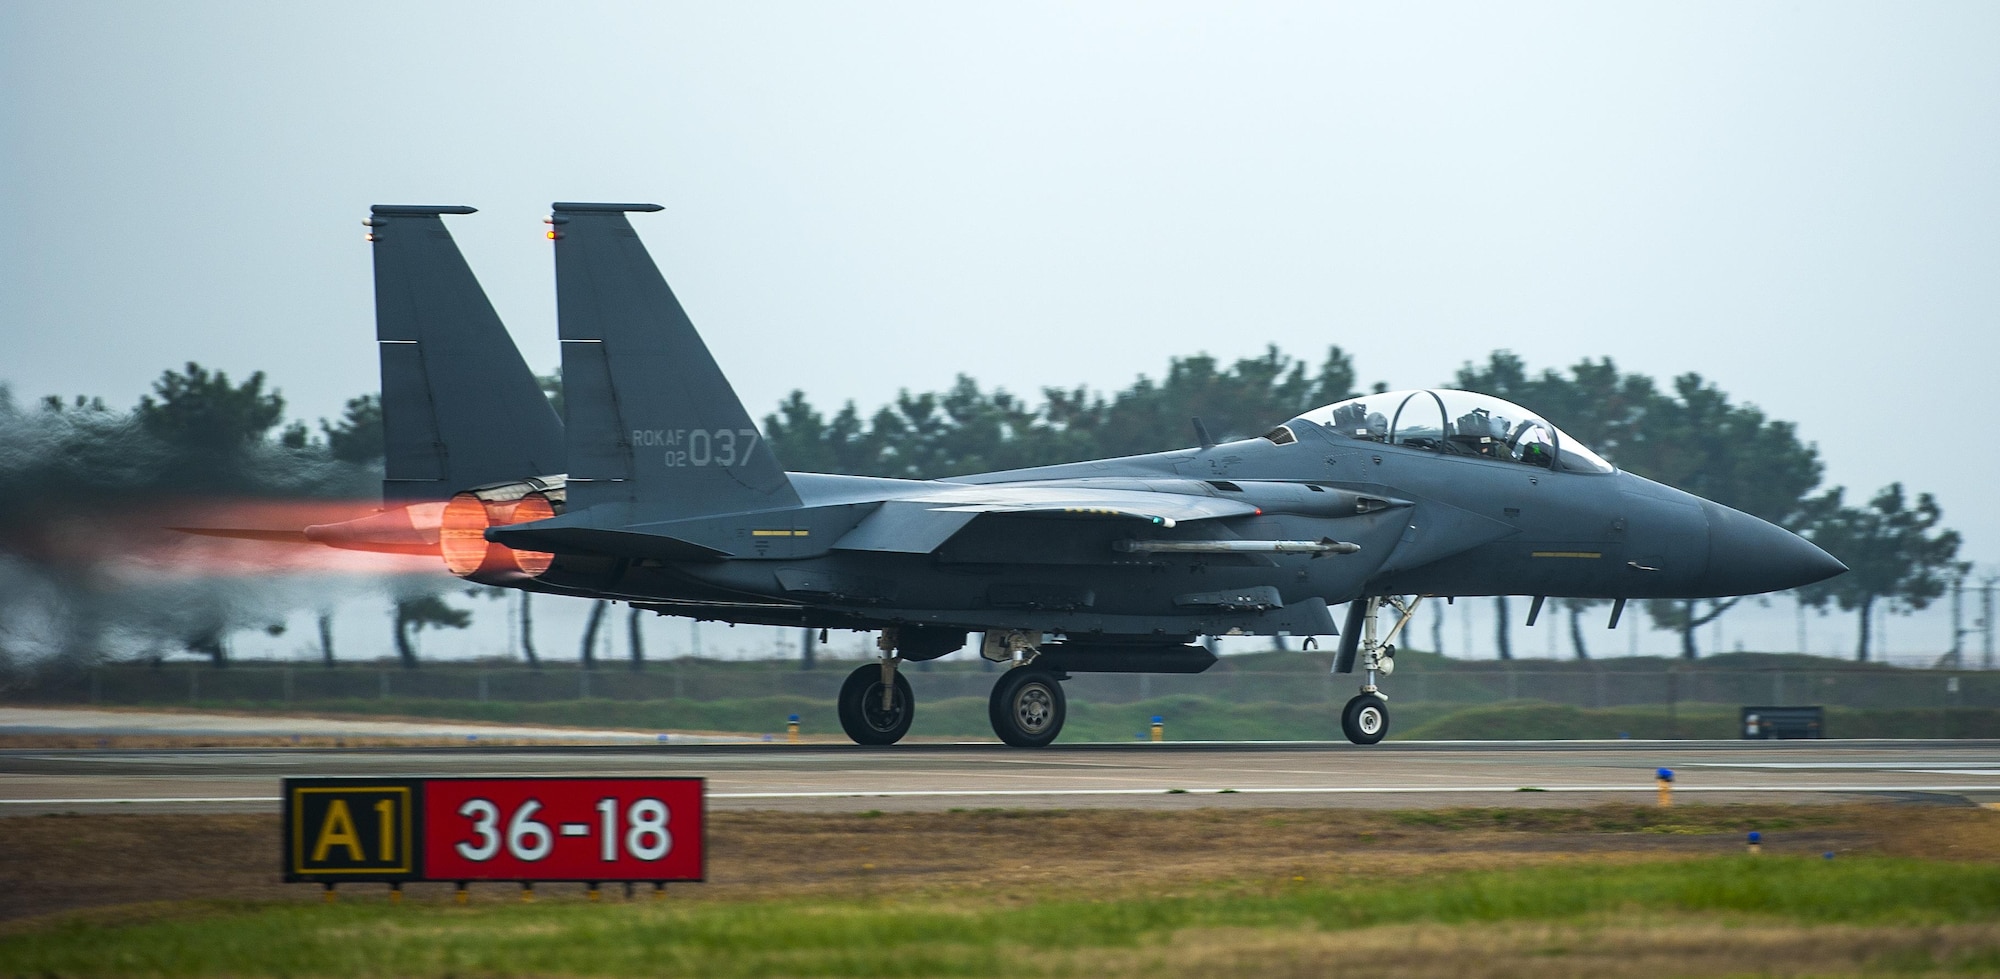 A Republic of Korea air force F-15K Slam Eagle from the 11th Fighter Wing, Daegu, prepares for takeoff as part of Buddy Wing 15-7 at Kunsan Air Base, Republic of Korea, Nov. 17, 2015. Buddy Wing is part of a combined fighter exchange program designed to improve interoperability between U.S. Air Force and ROKAF fighter squadrons and are conducted multiple times throughout the year in order to promote cultural awareness and sharpen combined combat capabilities. (U.S. Air Force photo by Staff Sgt. Nick Wilson/Released) 